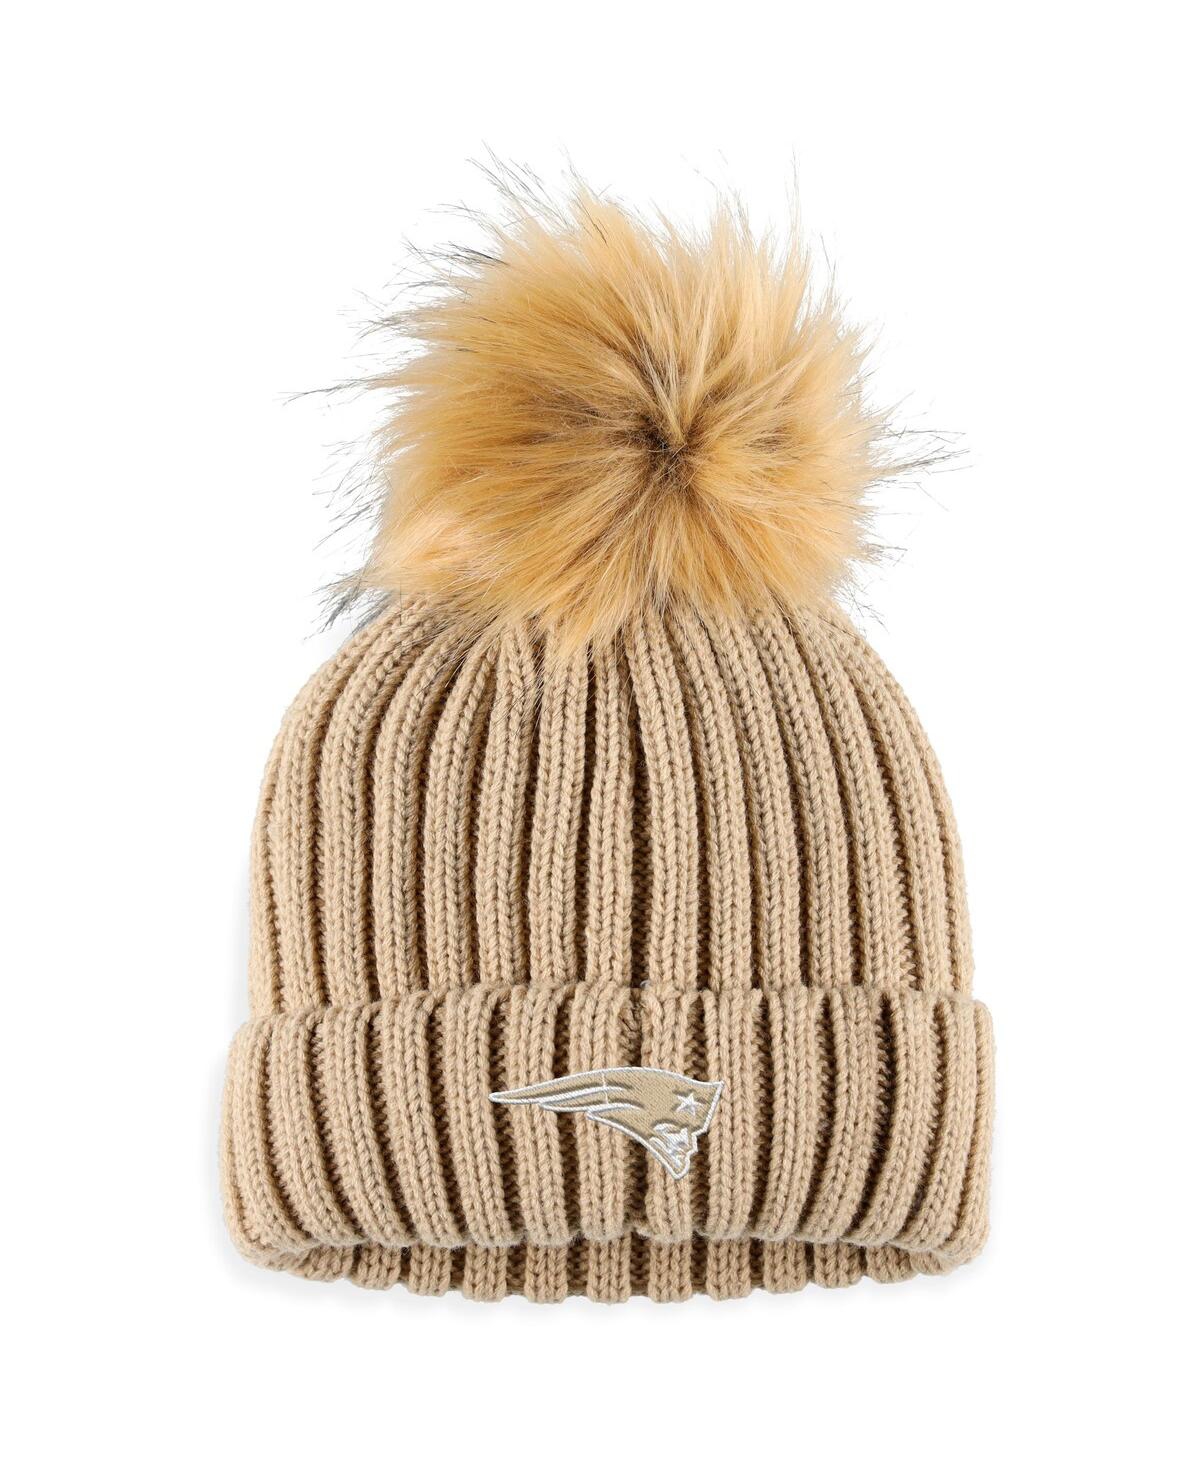 WEAR BY ERIN ANDREWS WOMEN'S WEAR BY ERIN ANDREWS TAN NEW ENGLAND PATRIOTS NEUTRAL CUFFED KNIT HAT WITH POM